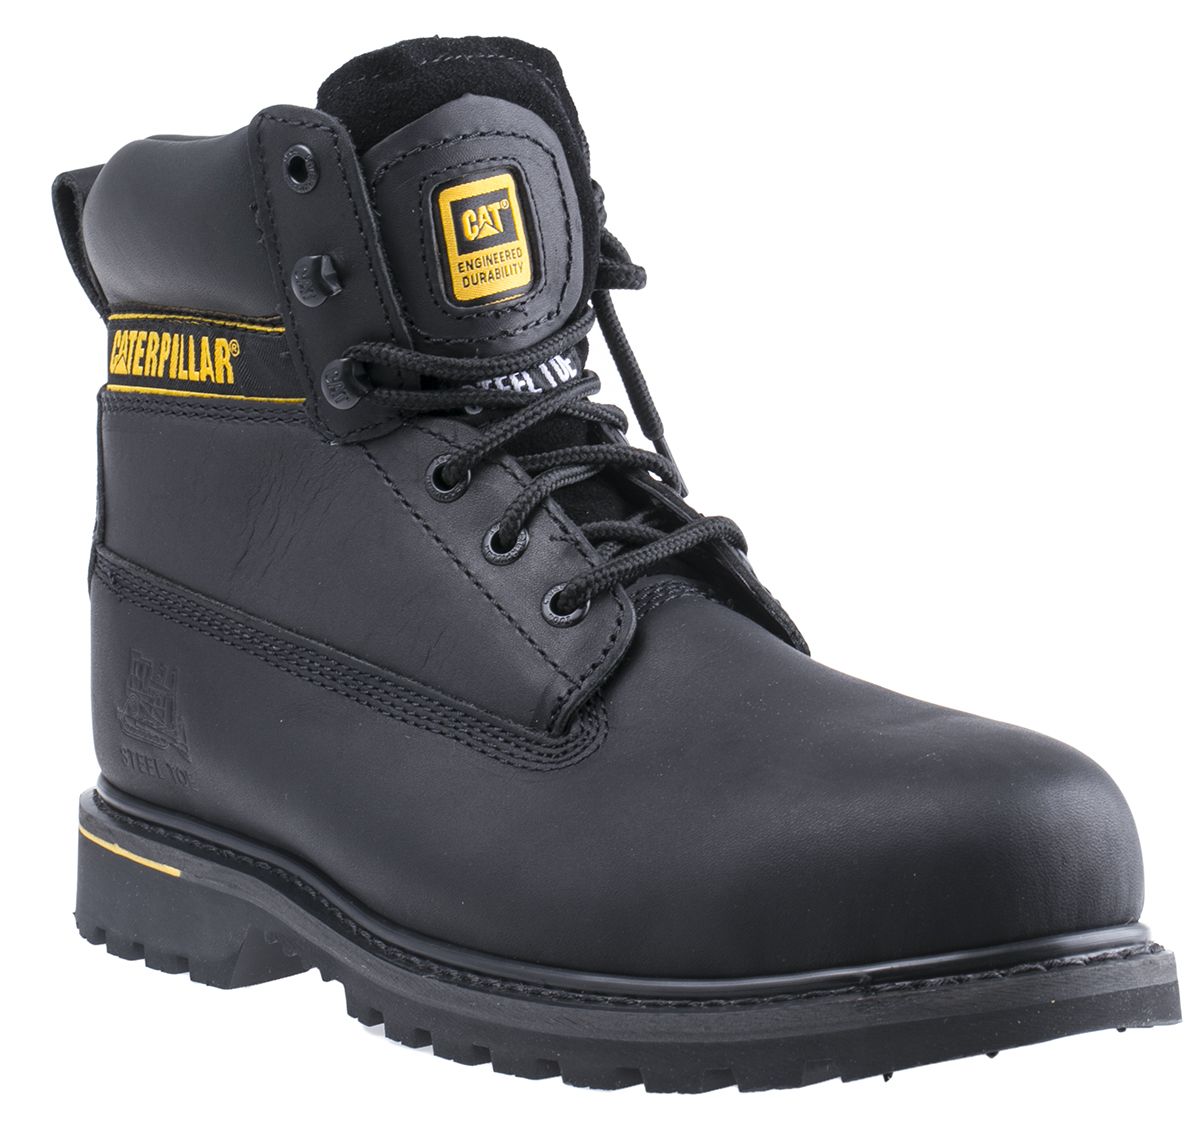 CAT Holton Black Steel Toe Capped Mens Safety Boots, UK 10, EU 44